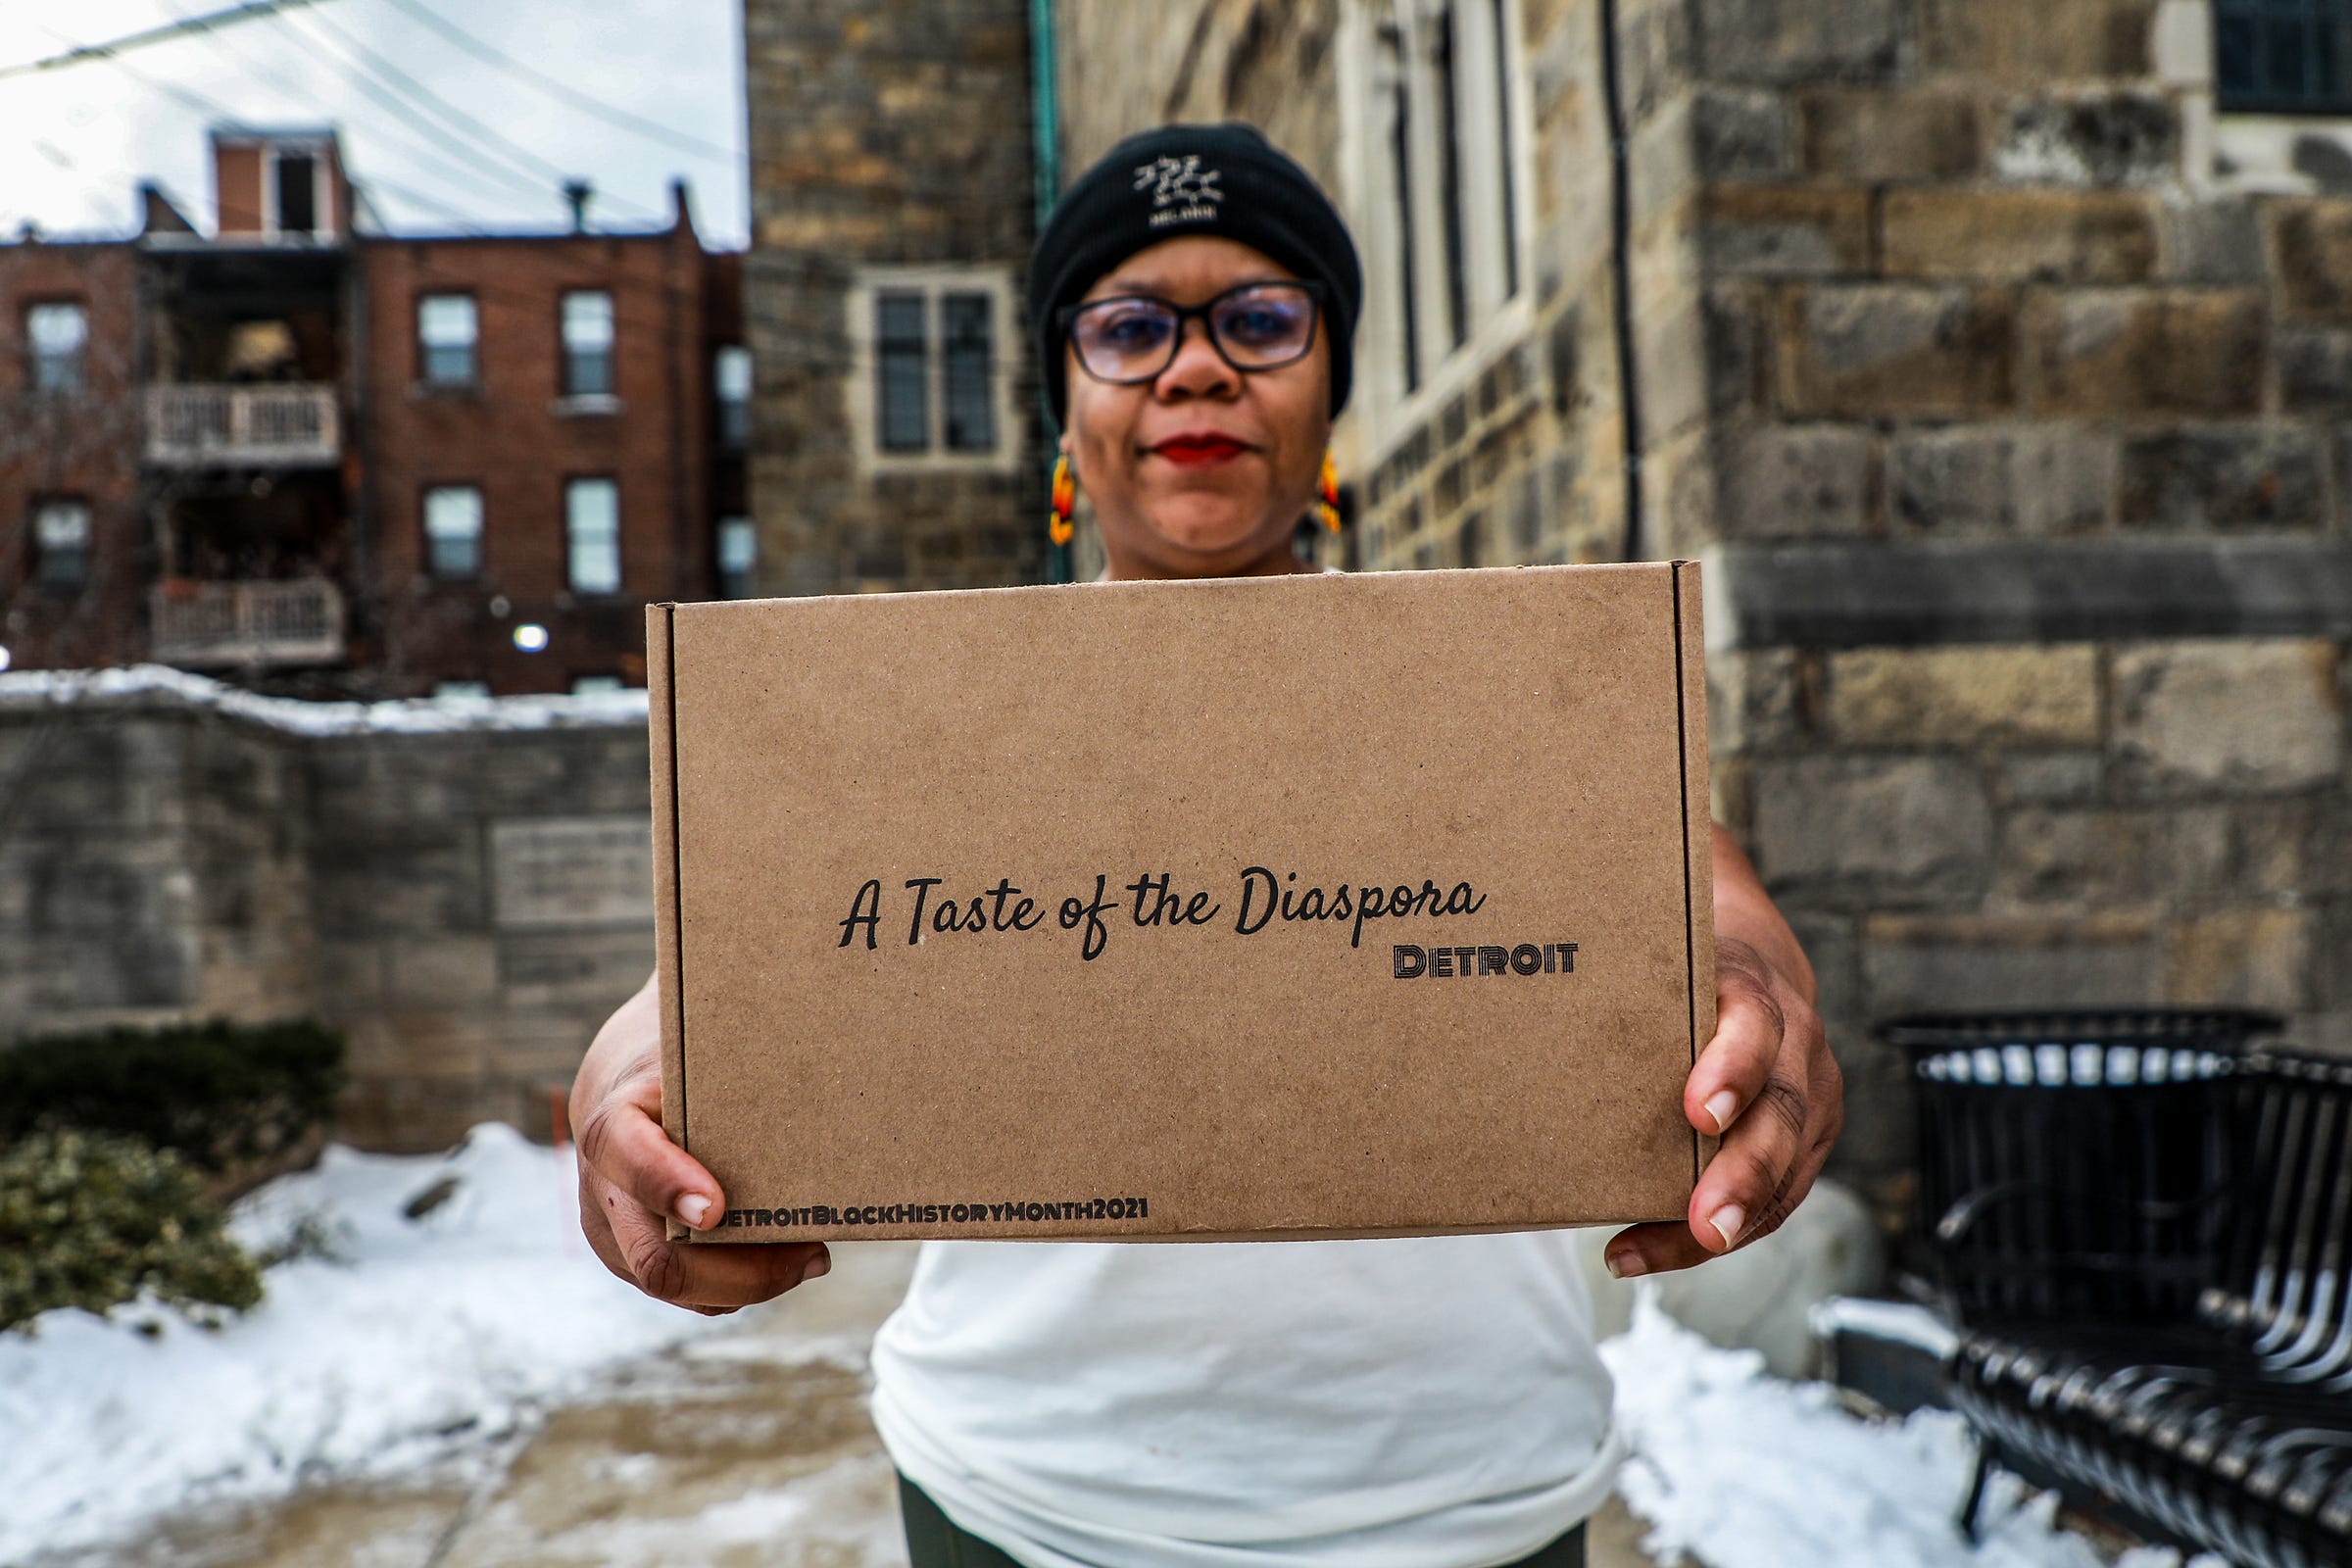 Ederique Goudia, 39, of Detroit, is the co-creator of Taste the Diaspora Detroit, which celebrates Africa’s contribution to American cuisine in highlighting the food of the African Diaspora with curated dishes sold as historic shoebox lunches each week during Black History Month. This initiative is in support of Black restaurants, chefs, farmers, and food makers and to grow the community across the local food system.